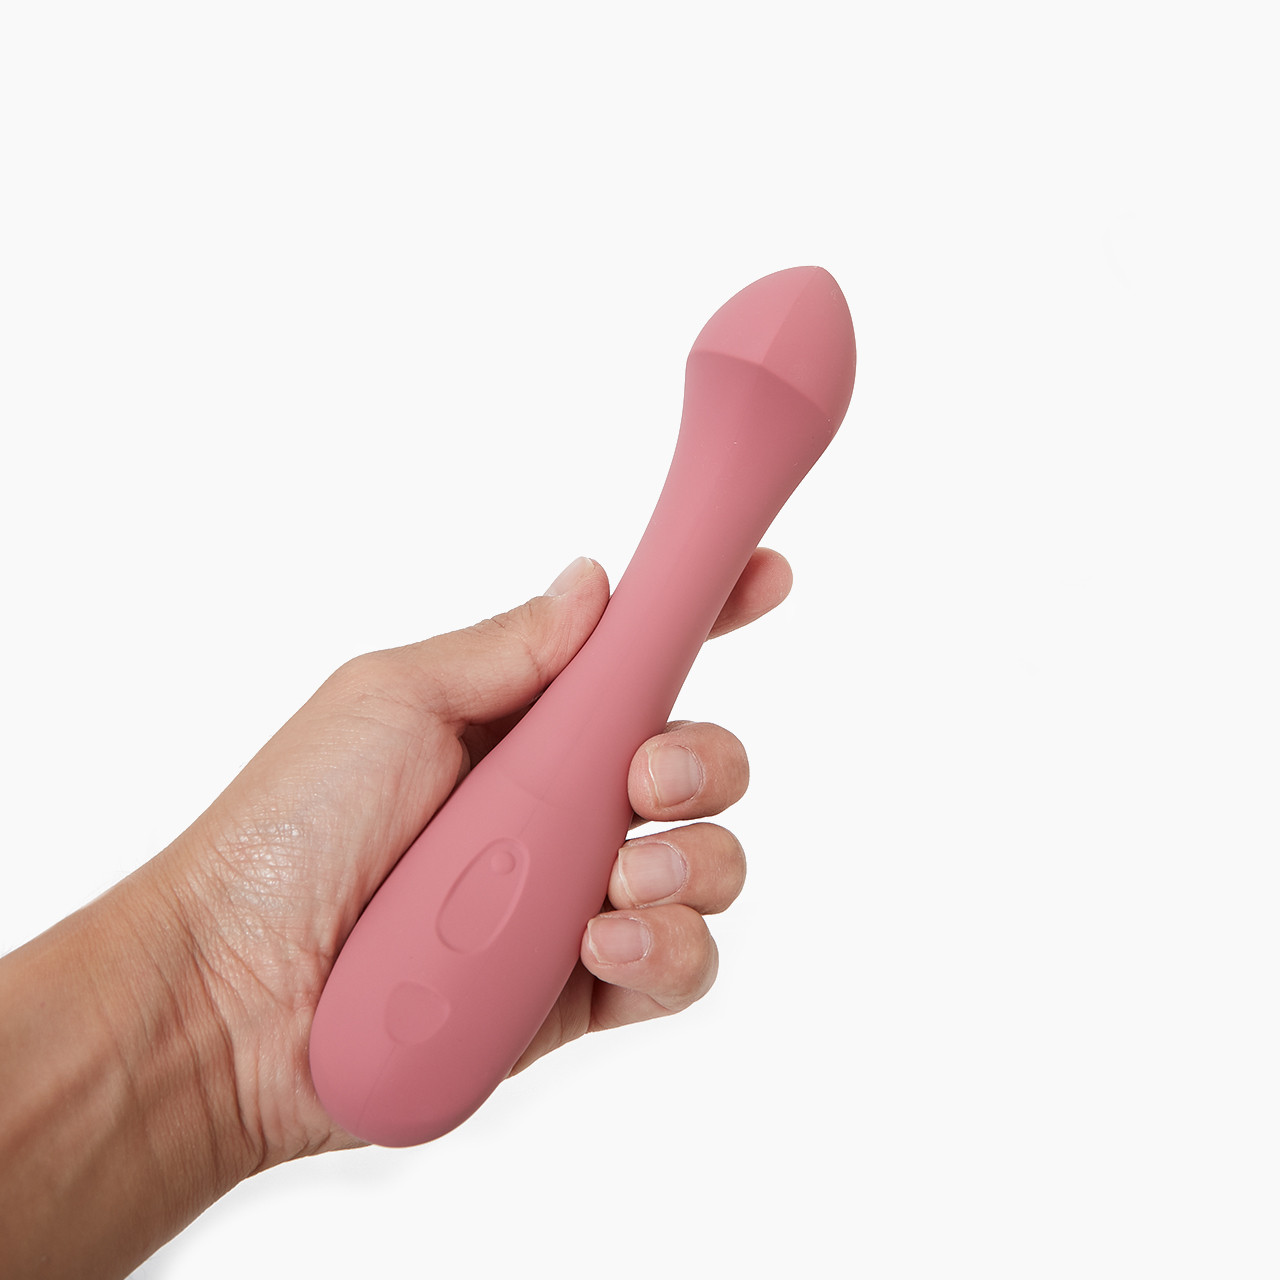 'Dame Arc', a pink silicone massager held in a hand, against a white background